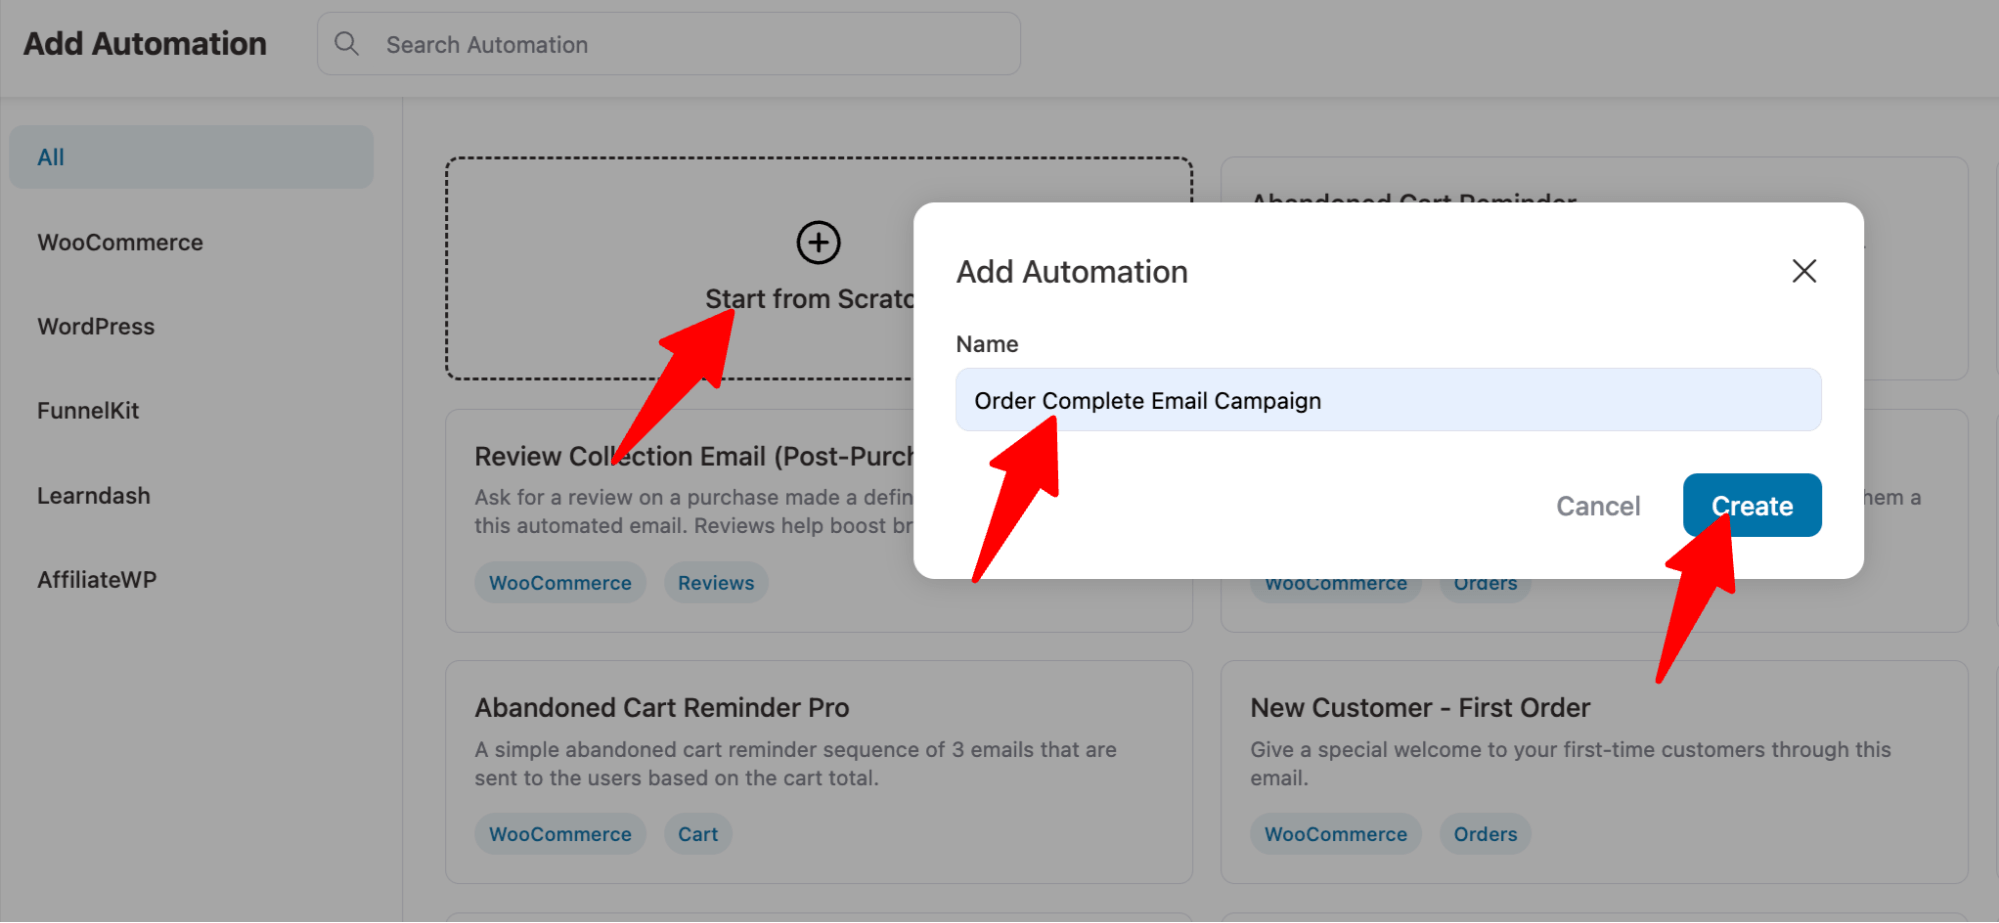 name automation for WooCOmmerce email customizations, create order complete email campaign